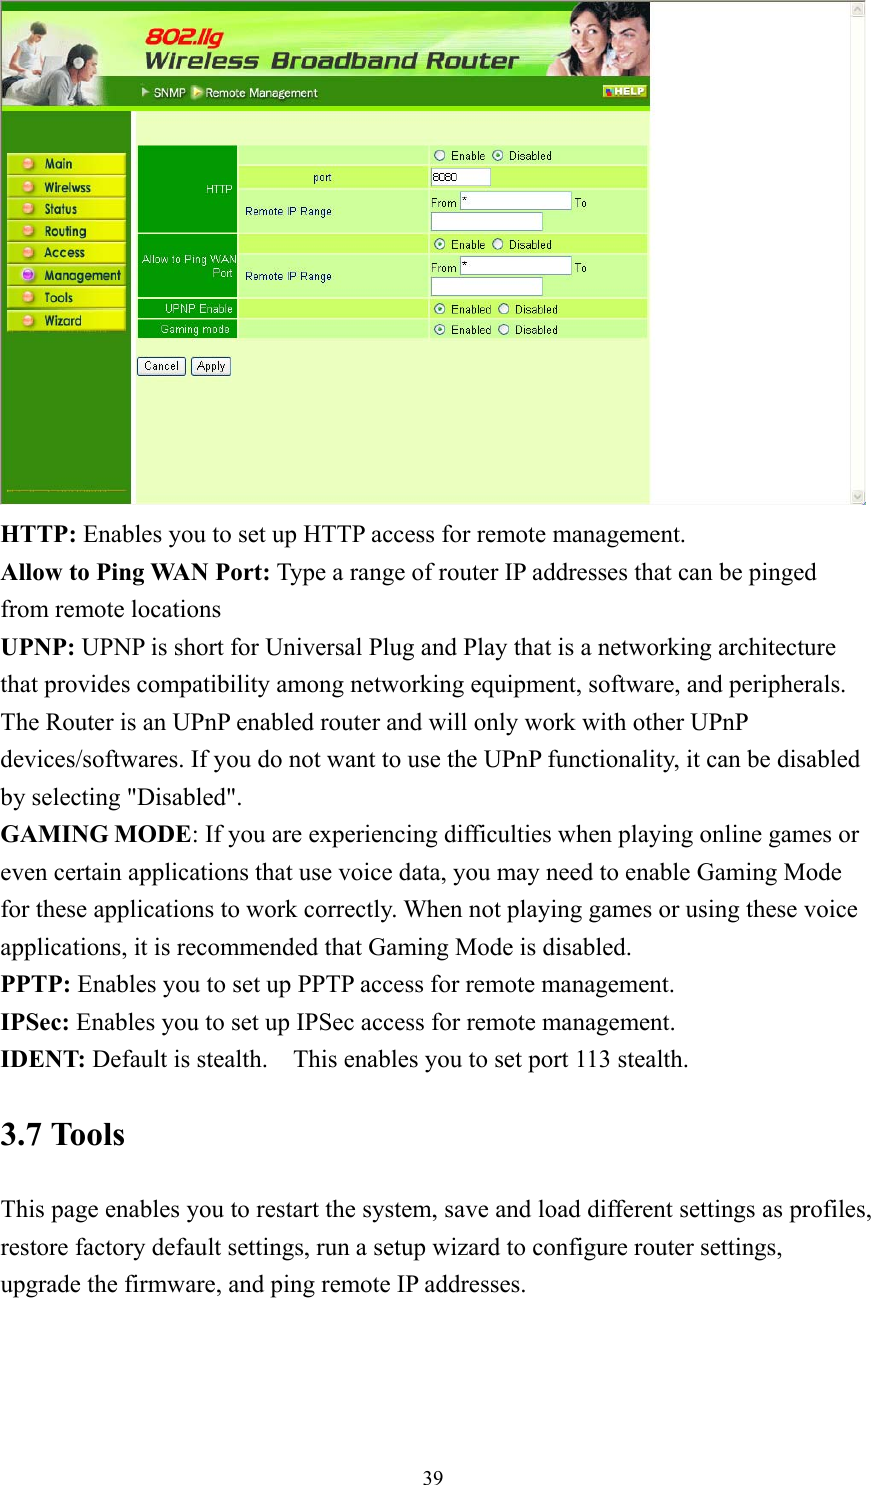  39 HTTP: Enables you to set up HTTP access for remote management. Allow to Ping WAN Port: Type a range of router IP addresses that can be pinged from remote locations UPNP: UPNP is short for Universal Plug and Play that is a networking architecture that provides compatibility among networking equipment, software, and peripherals. The Router is an UPnP enabled router and will only work with other UPnP devices/softwares. If you do not want to use the UPnP functionality, it can be disabled   by selecting &quot;Disabled&quot;. GAMING MODE: If you are experiencing difficulties when playing online games or even certain applications that use voice data, you may need to enable Gaming Mode for these applications to work correctly. When not playing games or using these voice applications, it is recommended that Gaming Mode is disabled. PPTP: Enables you to set up PPTP access for remote management. IPSec: Enables you to set up IPSec access for remote management. IDENT: Default is stealth.    This enables you to set port 113 stealth. 3.7 Tools This page enables you to restart the system, save and load different settings as profiles, restore factory default settings, run a setup wizard to configure router settings, upgrade the firmware, and ping remote IP addresses. 